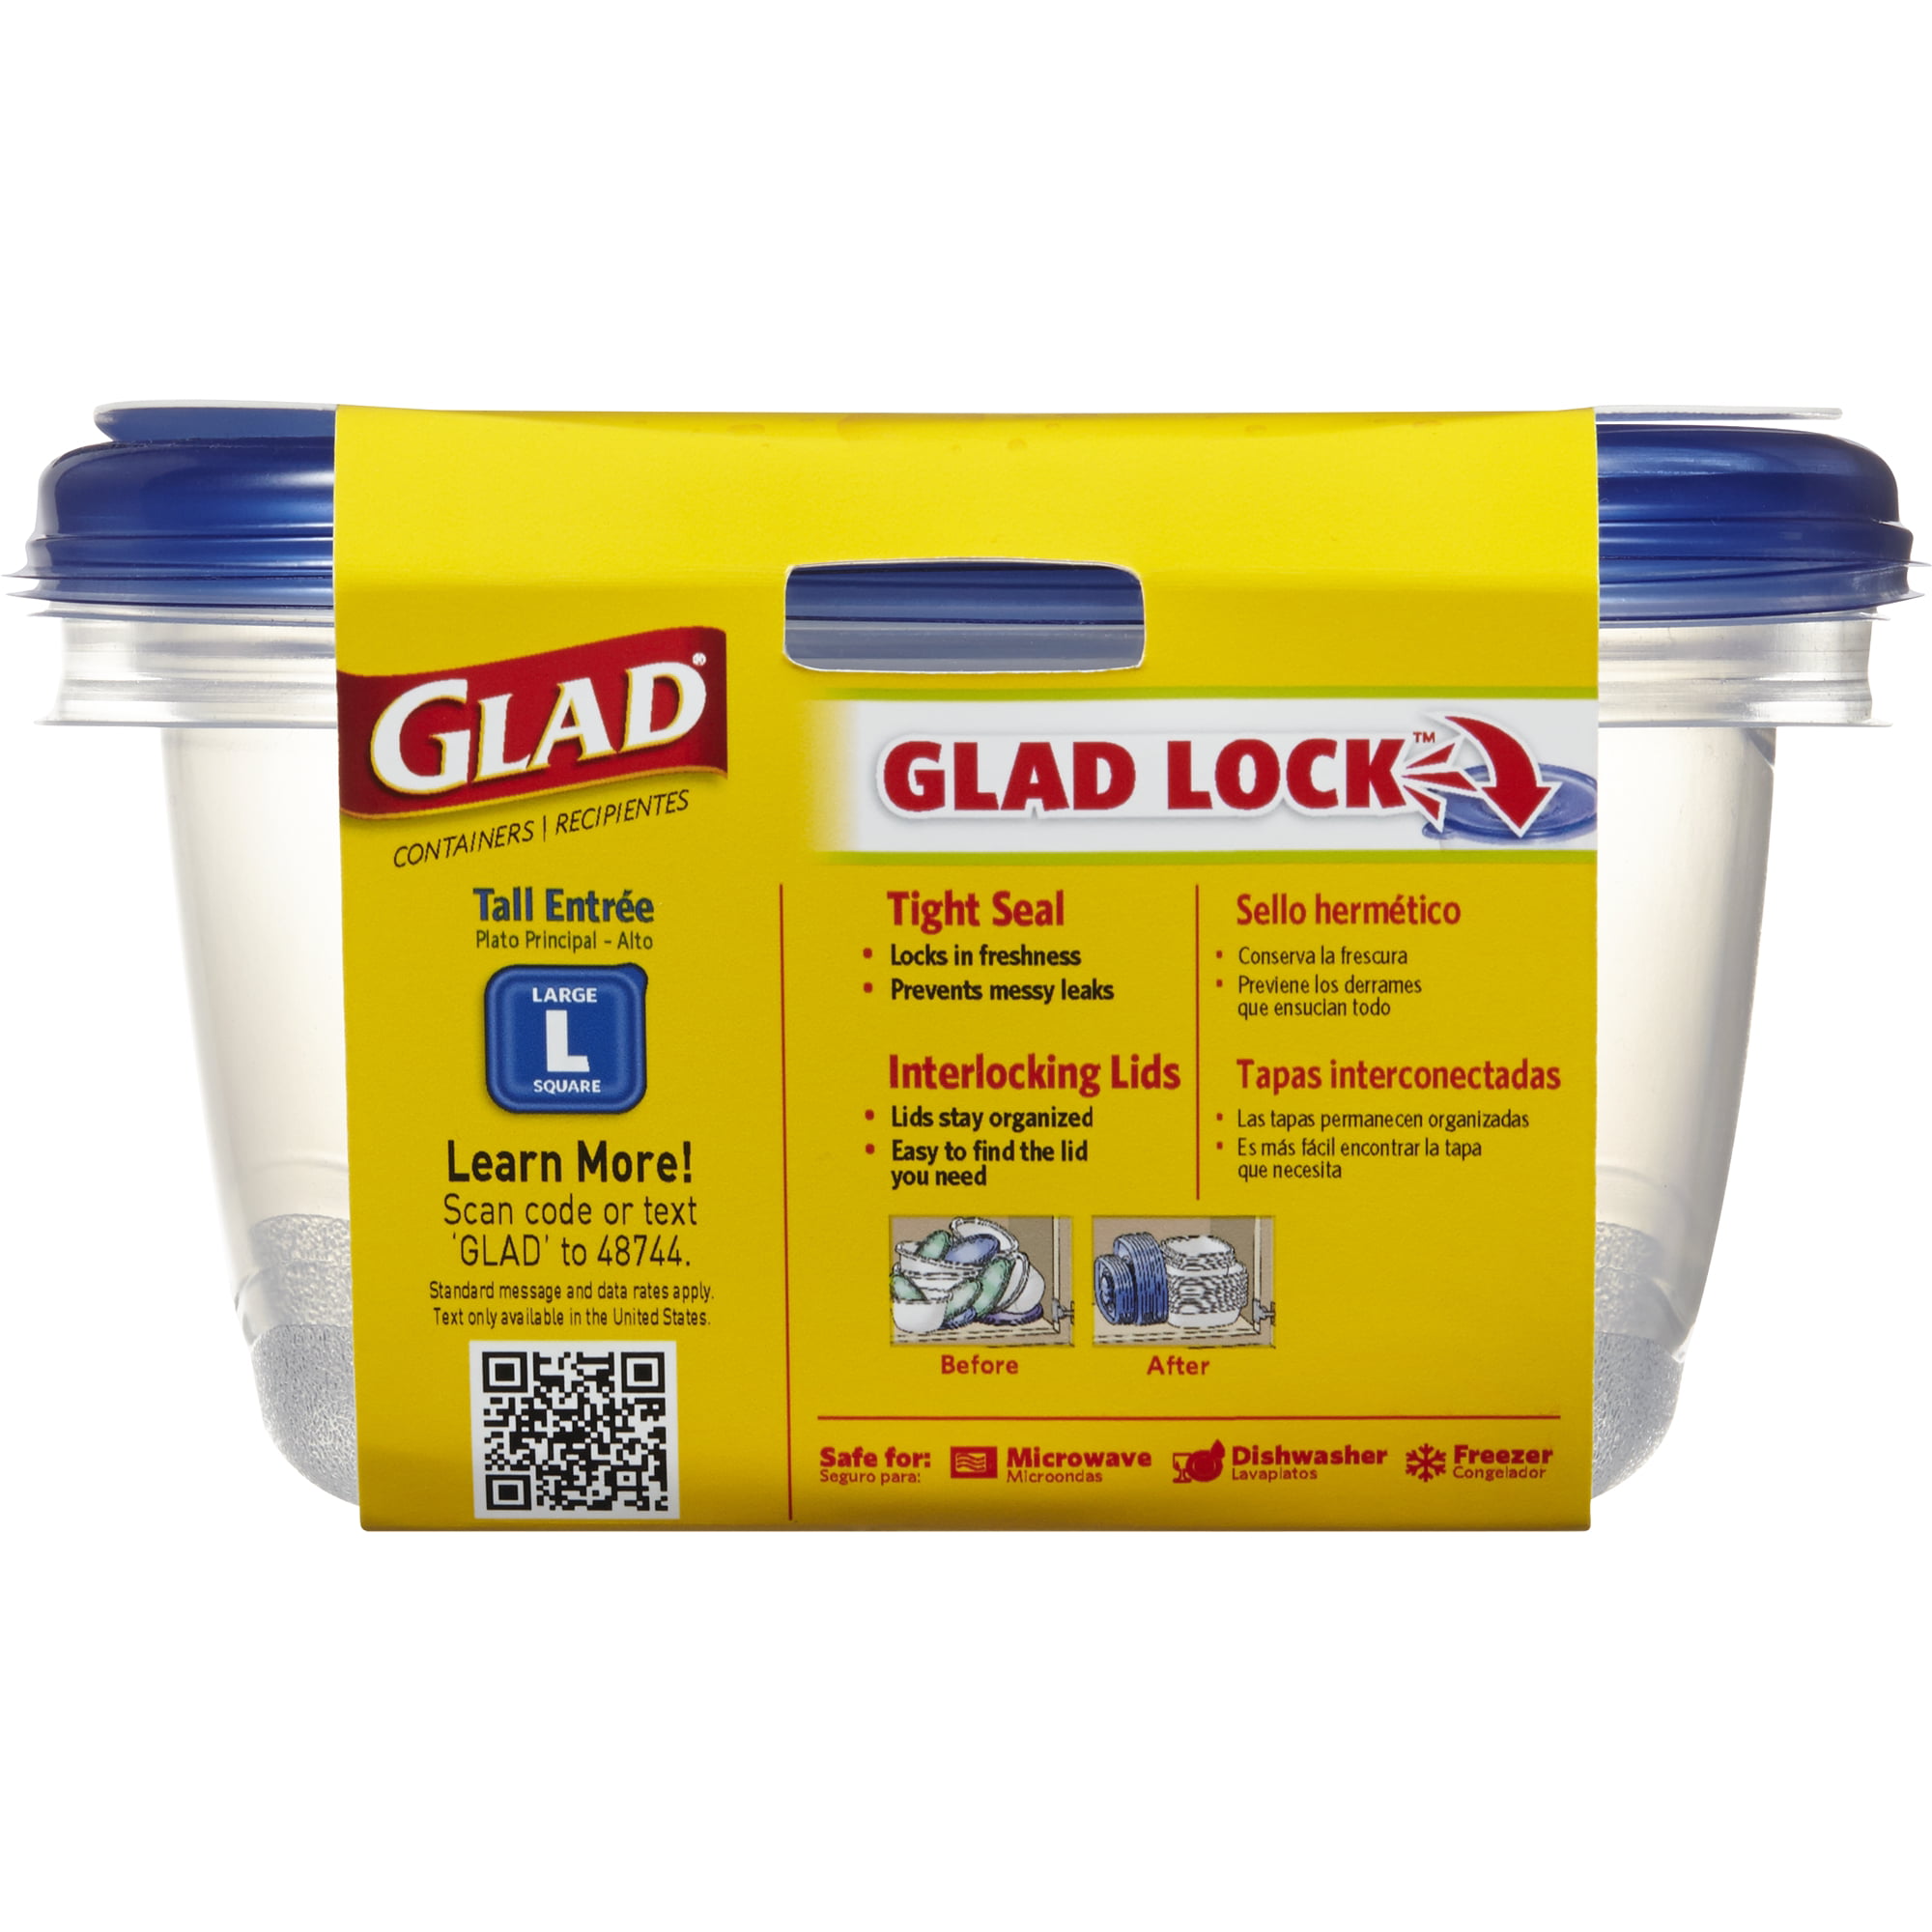 Glad GladWare Tall Entrée Food Storage Containers | Large Square Containers  for Food Hold up to 42 O…See more Glad GladWare Tall Entrée Food Storage